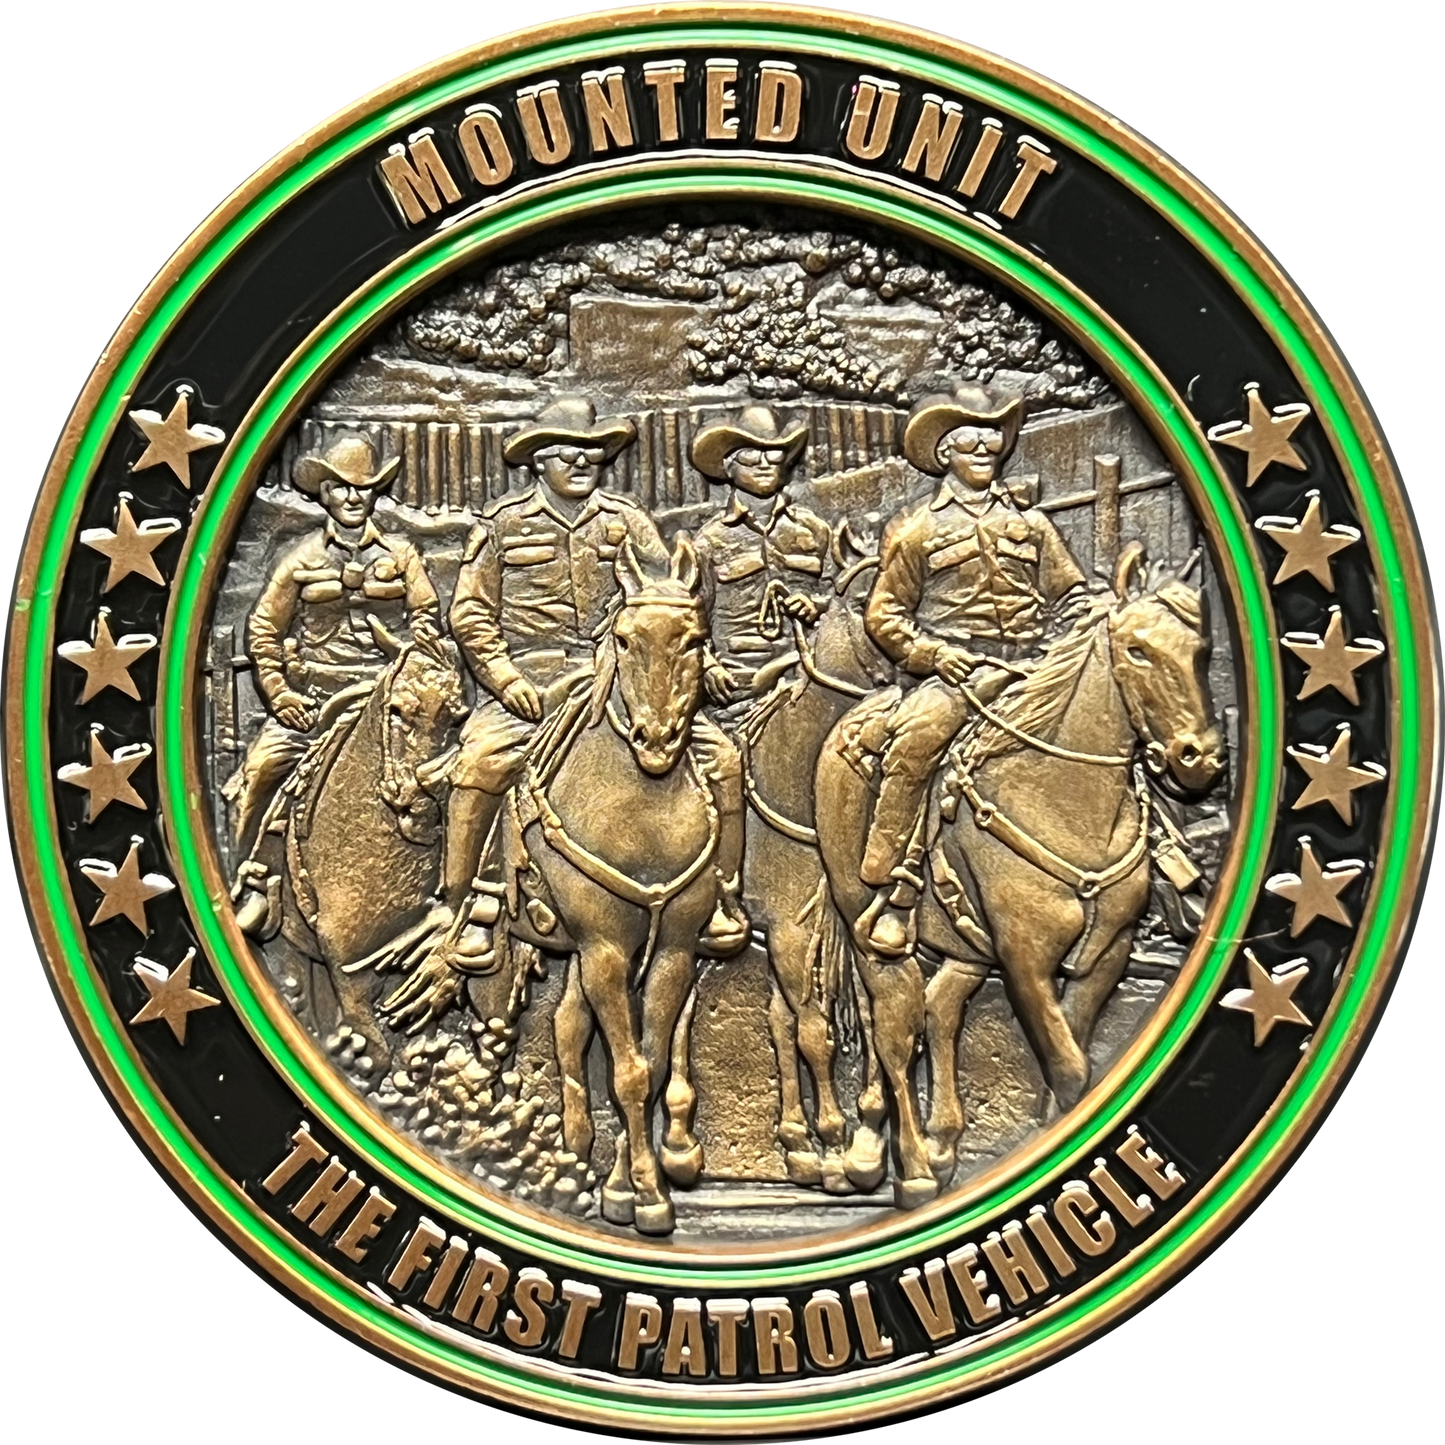 DL13-004 Thin Green Line 10 Foot Tall Cops Police Border Patrol Agent Horse Patrol Mounted Unit Challenge Coin